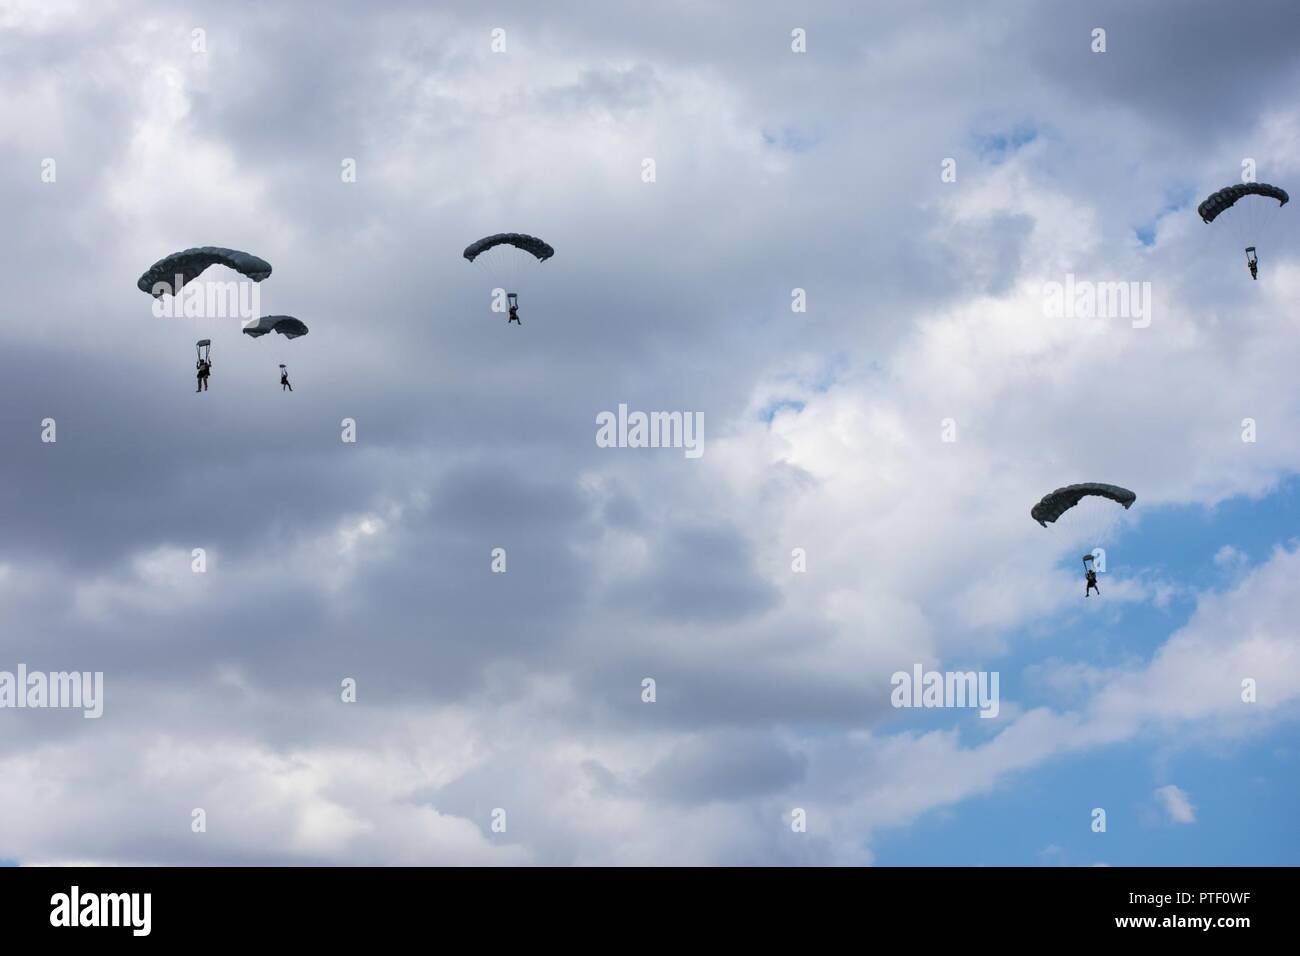 Naval Special Warfare Operators conduct a combined airborne insertion with Ukrainian Special Operation Forces at Ochakiv, Ukraine, July 9, 2017 during Sea Breeze 17.  Sea Breeze is a U.S. and Ukraine co-hosted multinational maritime exercise held in the Black Sea and is designed to enhance interoperability of participating nations and strengthen maritime security within the region. Stock Photo